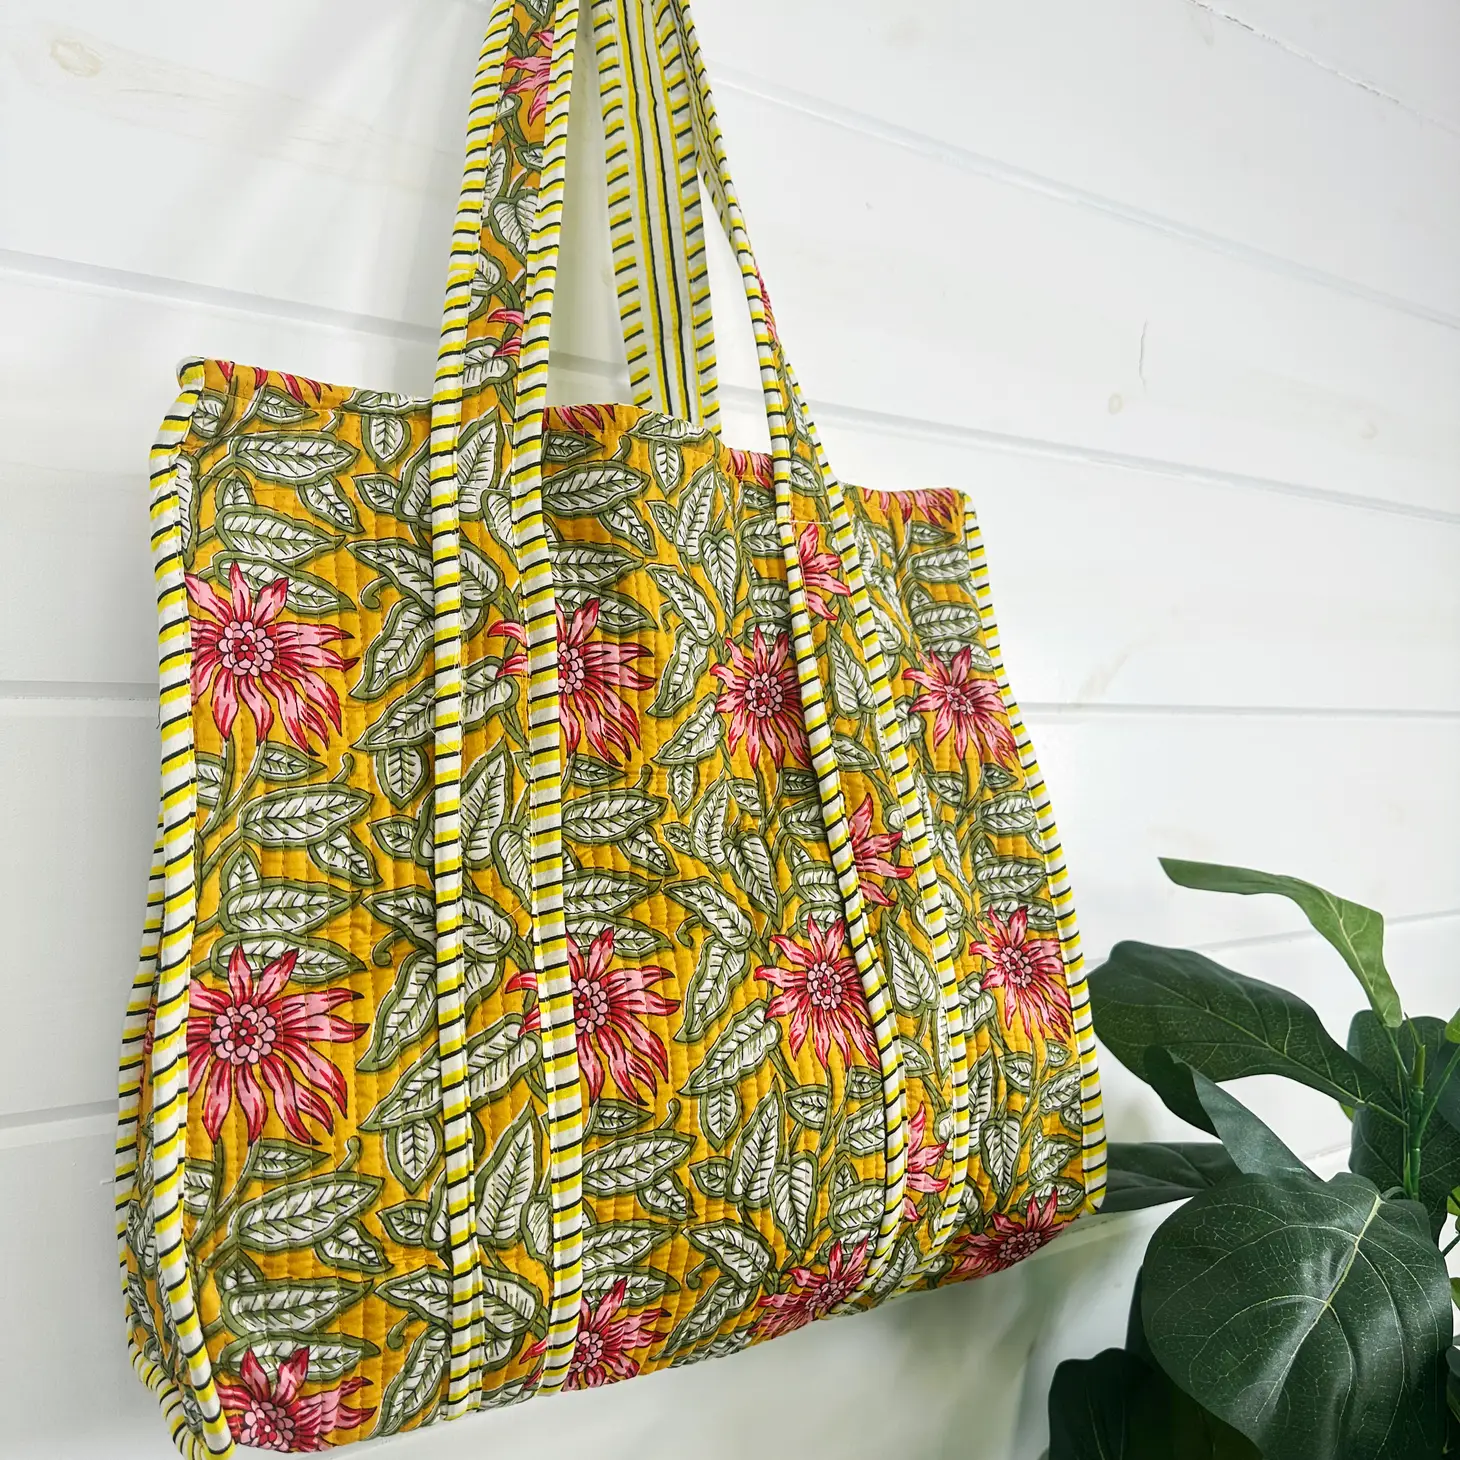 Unique Handmade Fabric Bags & Purses Made It By Hand